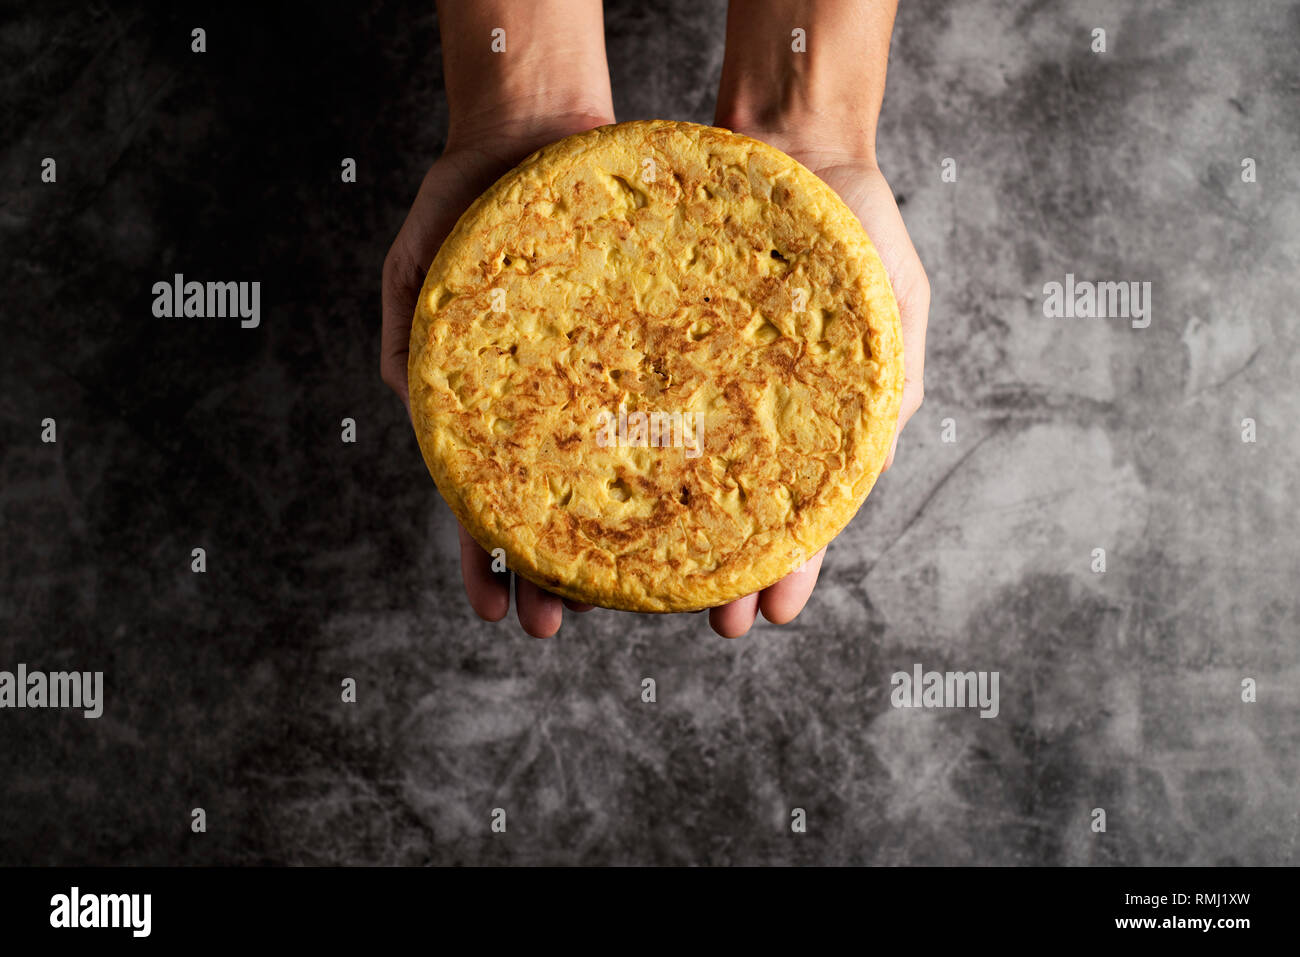 high angle view of a caucasian man with a typical tortilla de patatas, spanish omelet, on his hands, on a gray stone surface Stock Photo